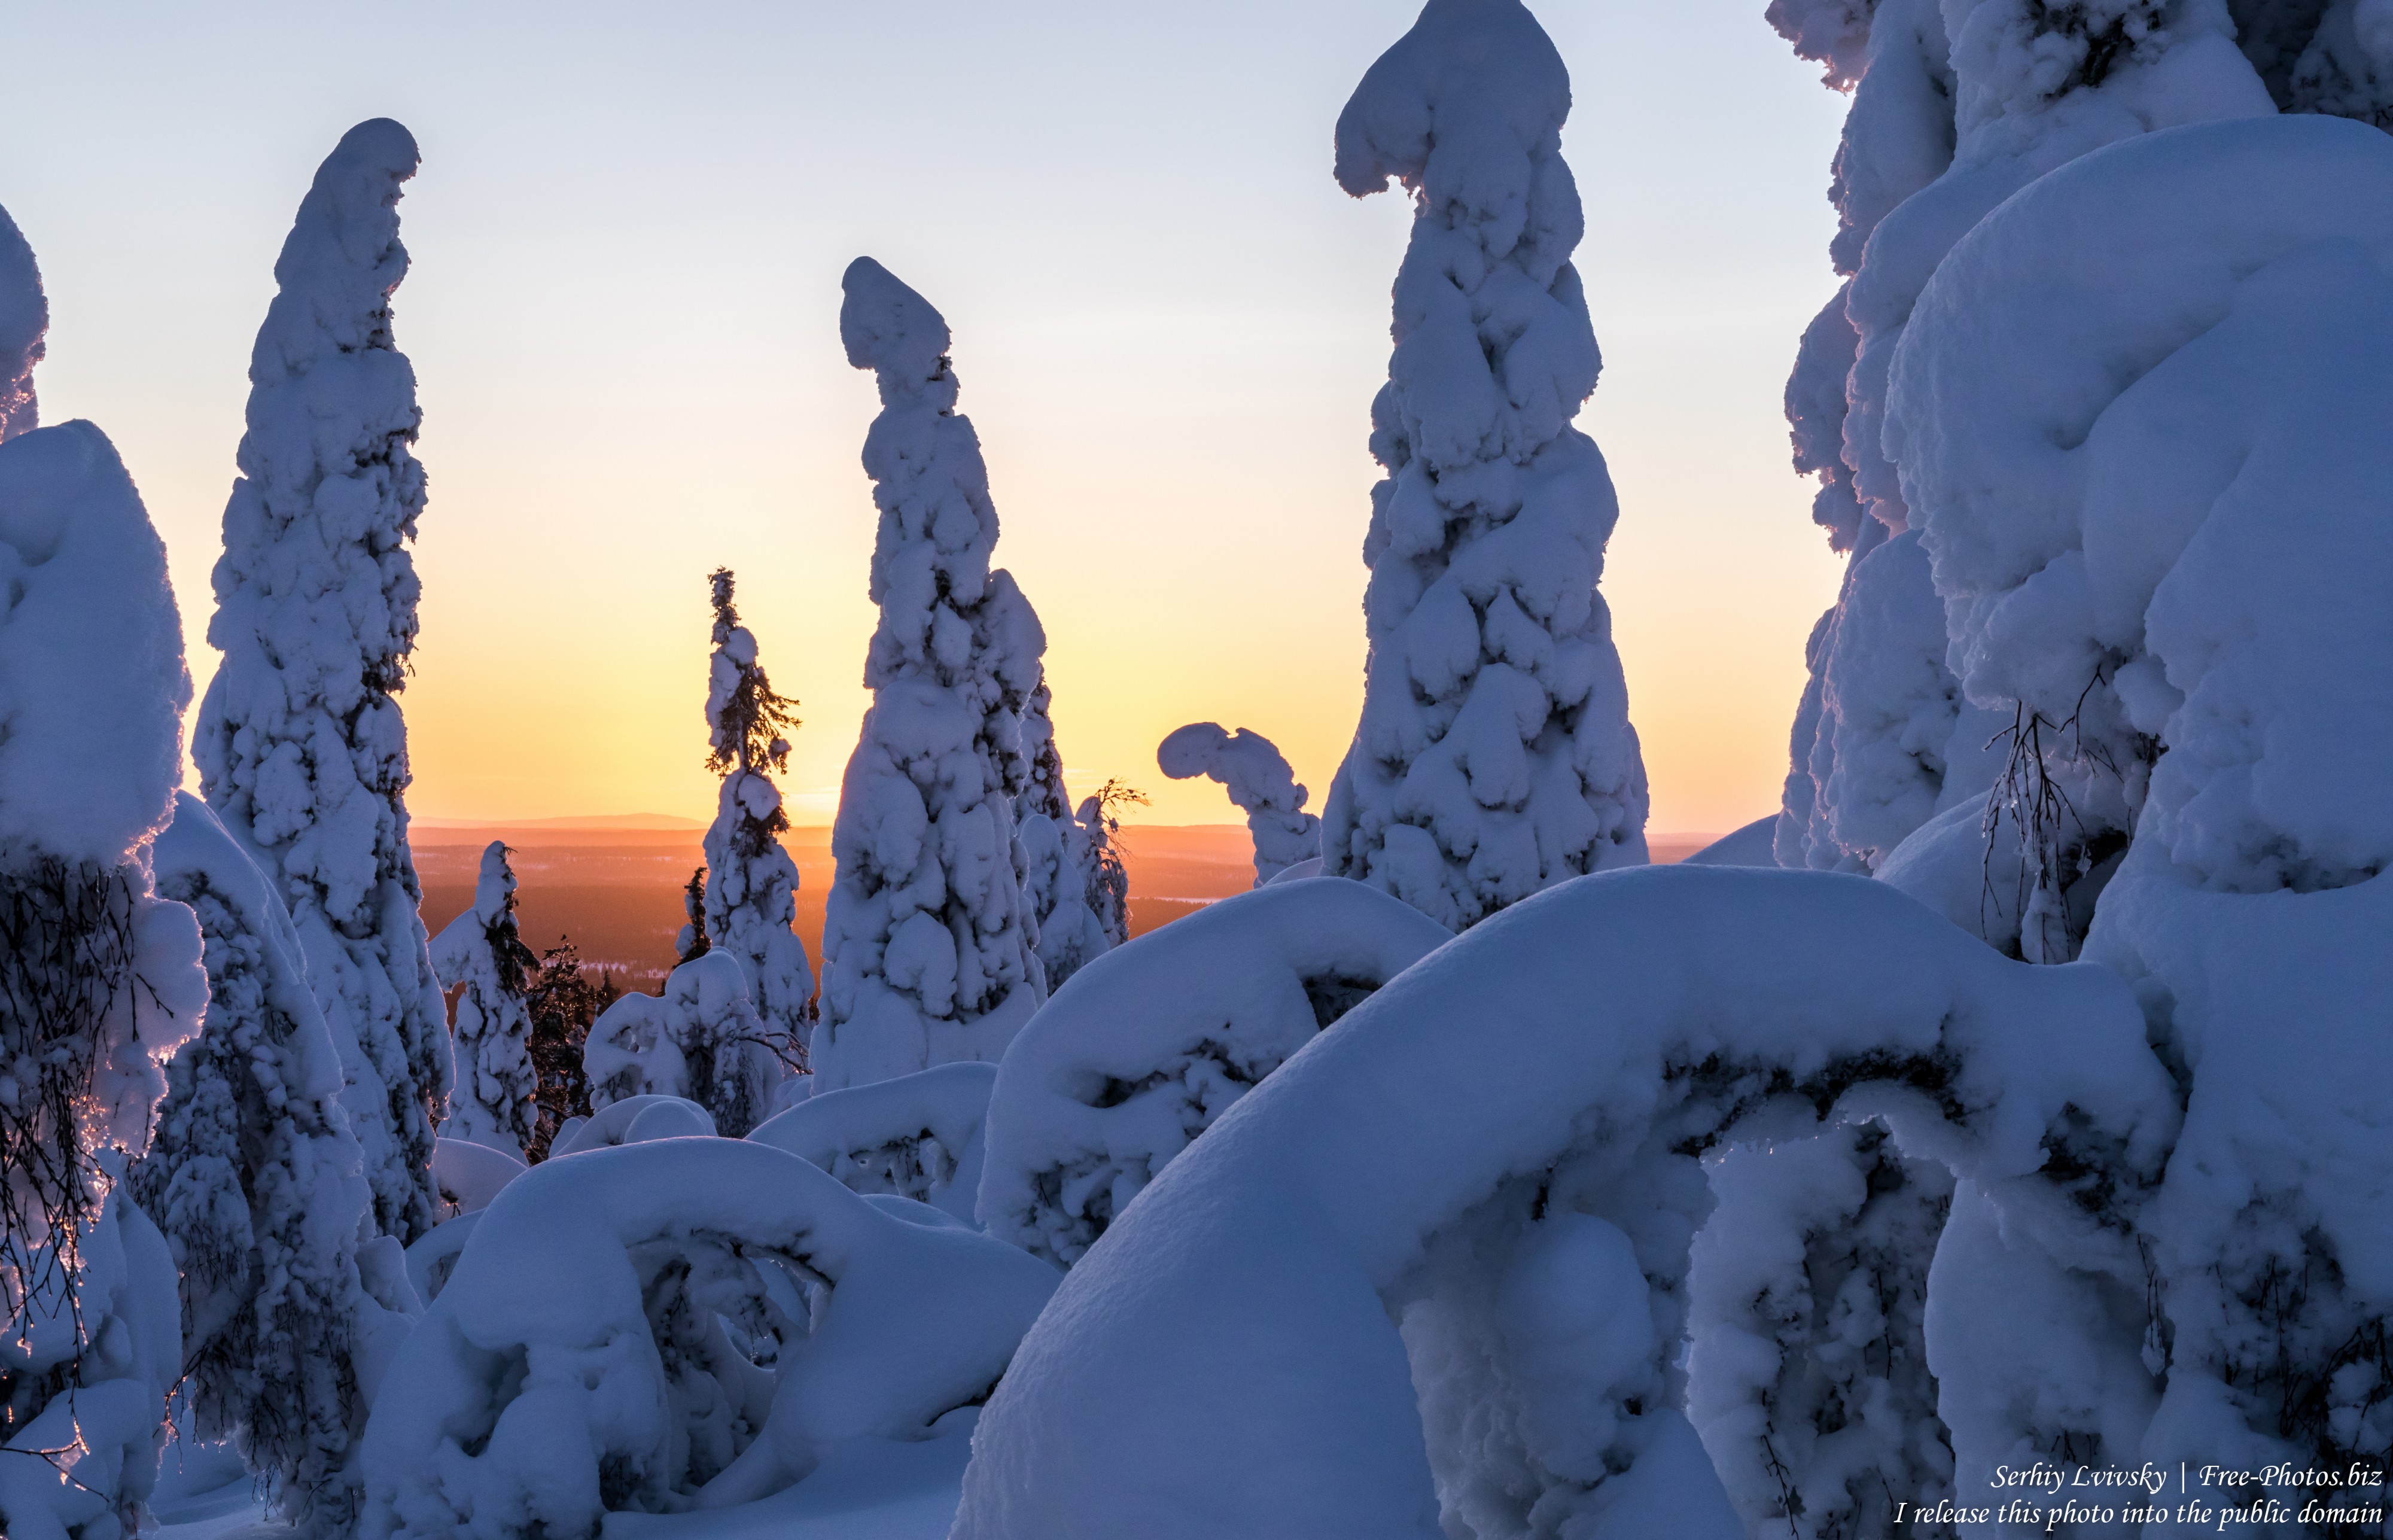 Valtavaara, Finland, photographed in January 2020 by Serhiy Lvivsky, picture 15